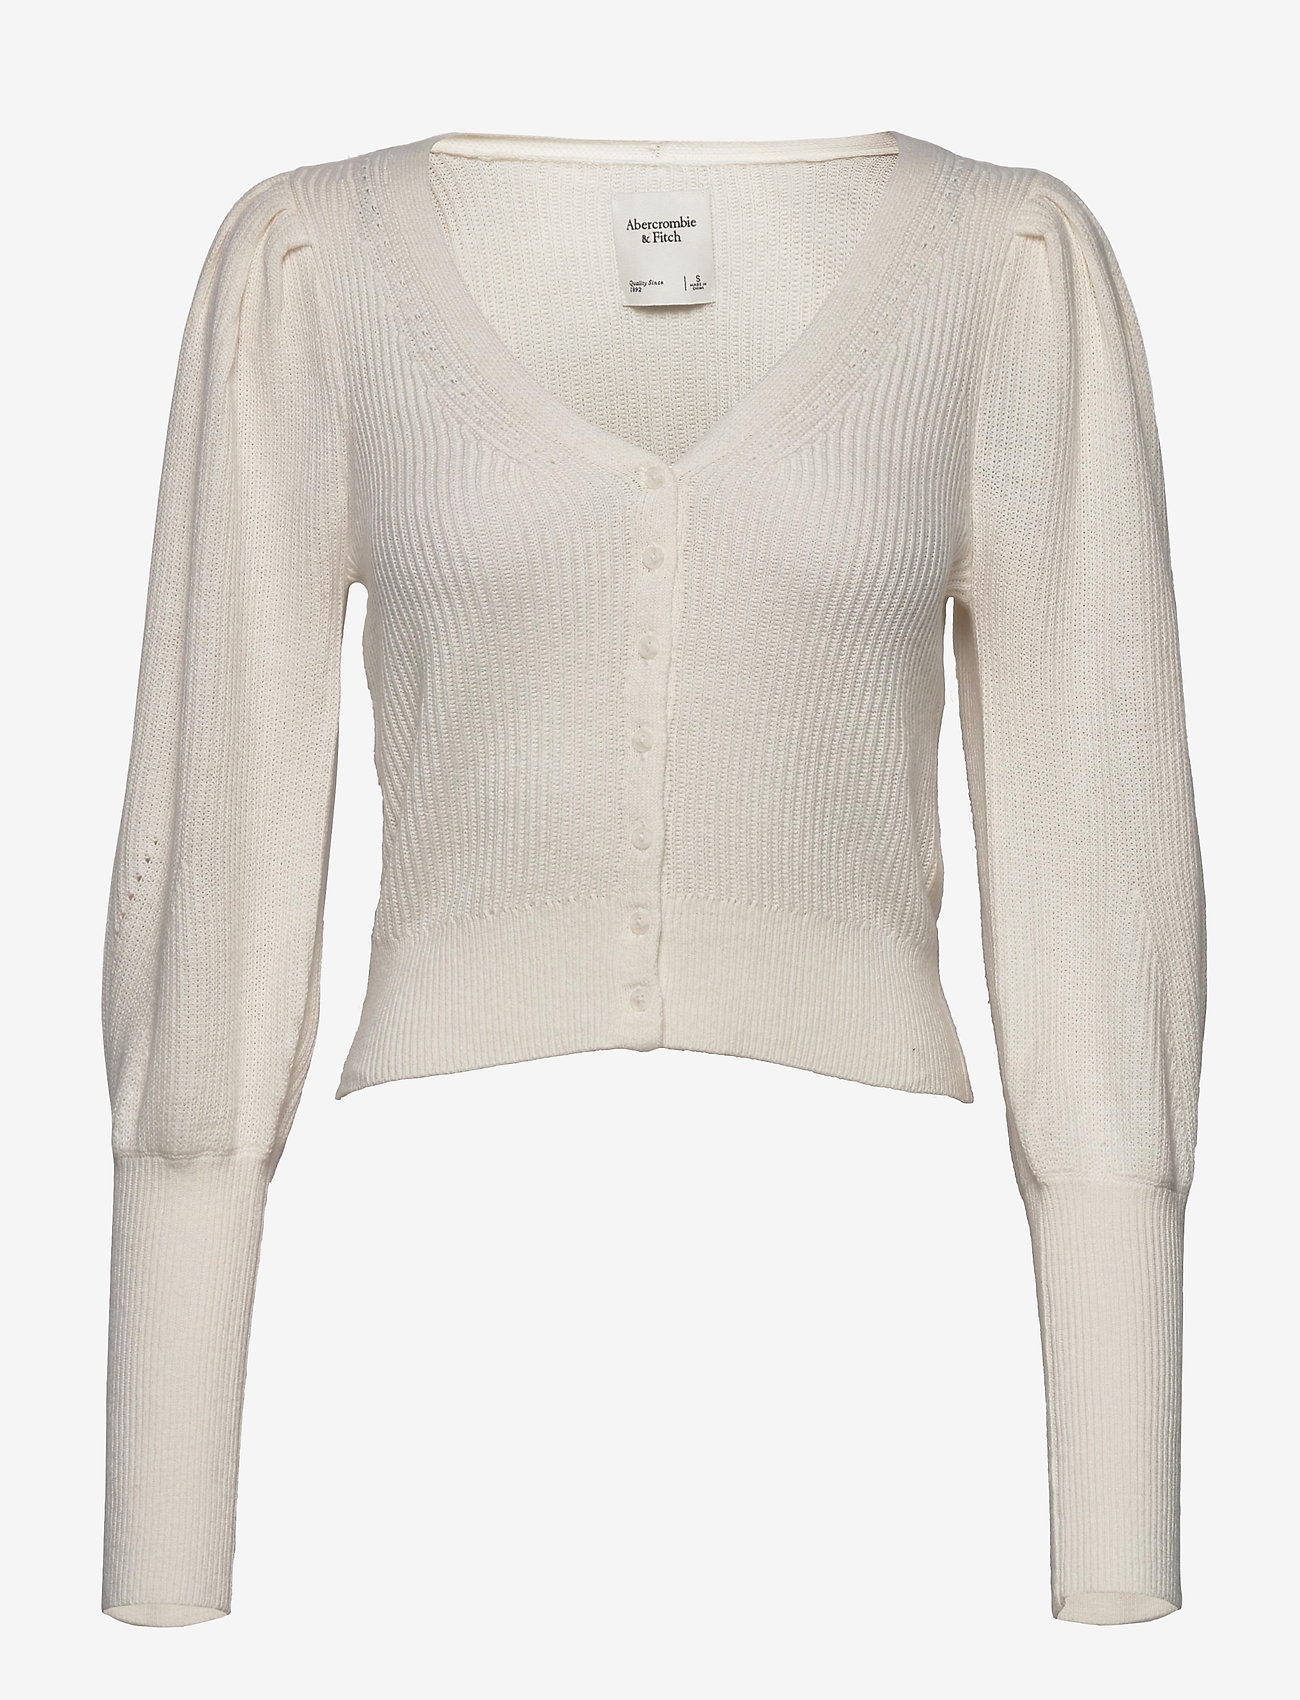 abercrombie and fitch cardigan womens